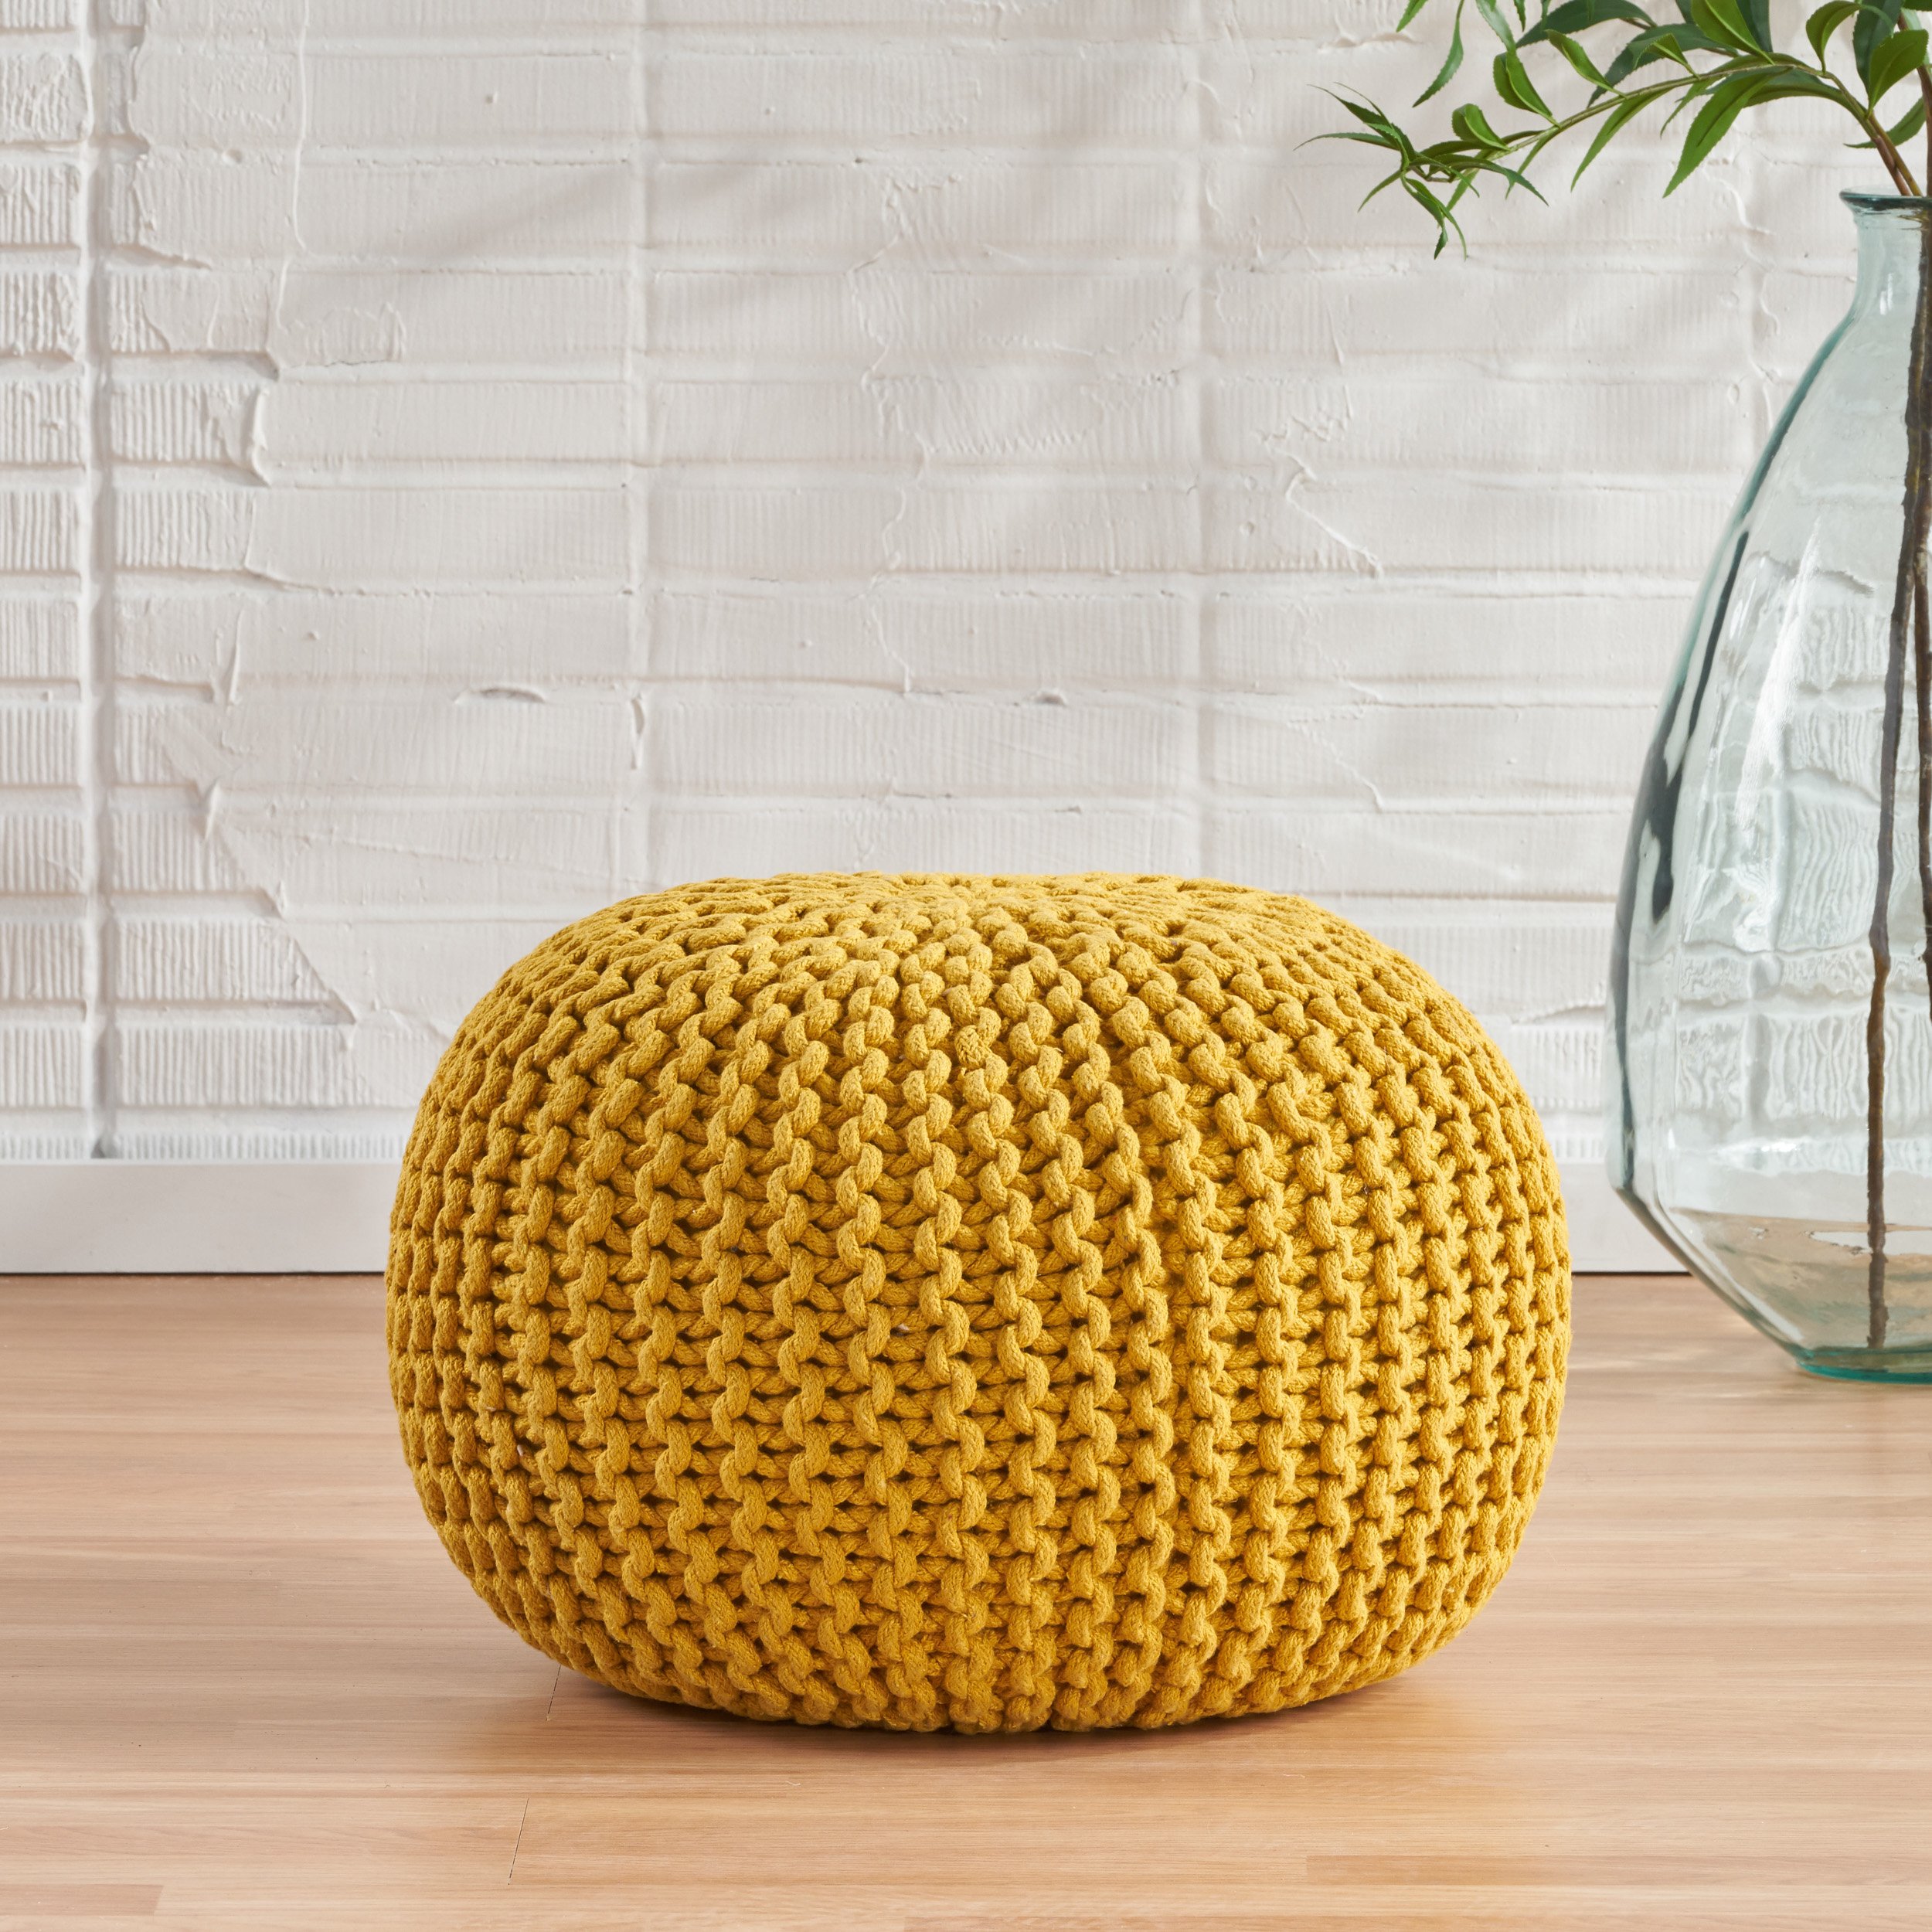 Poona Hand Knitted Artisan Pouf Ottomans - Yellow